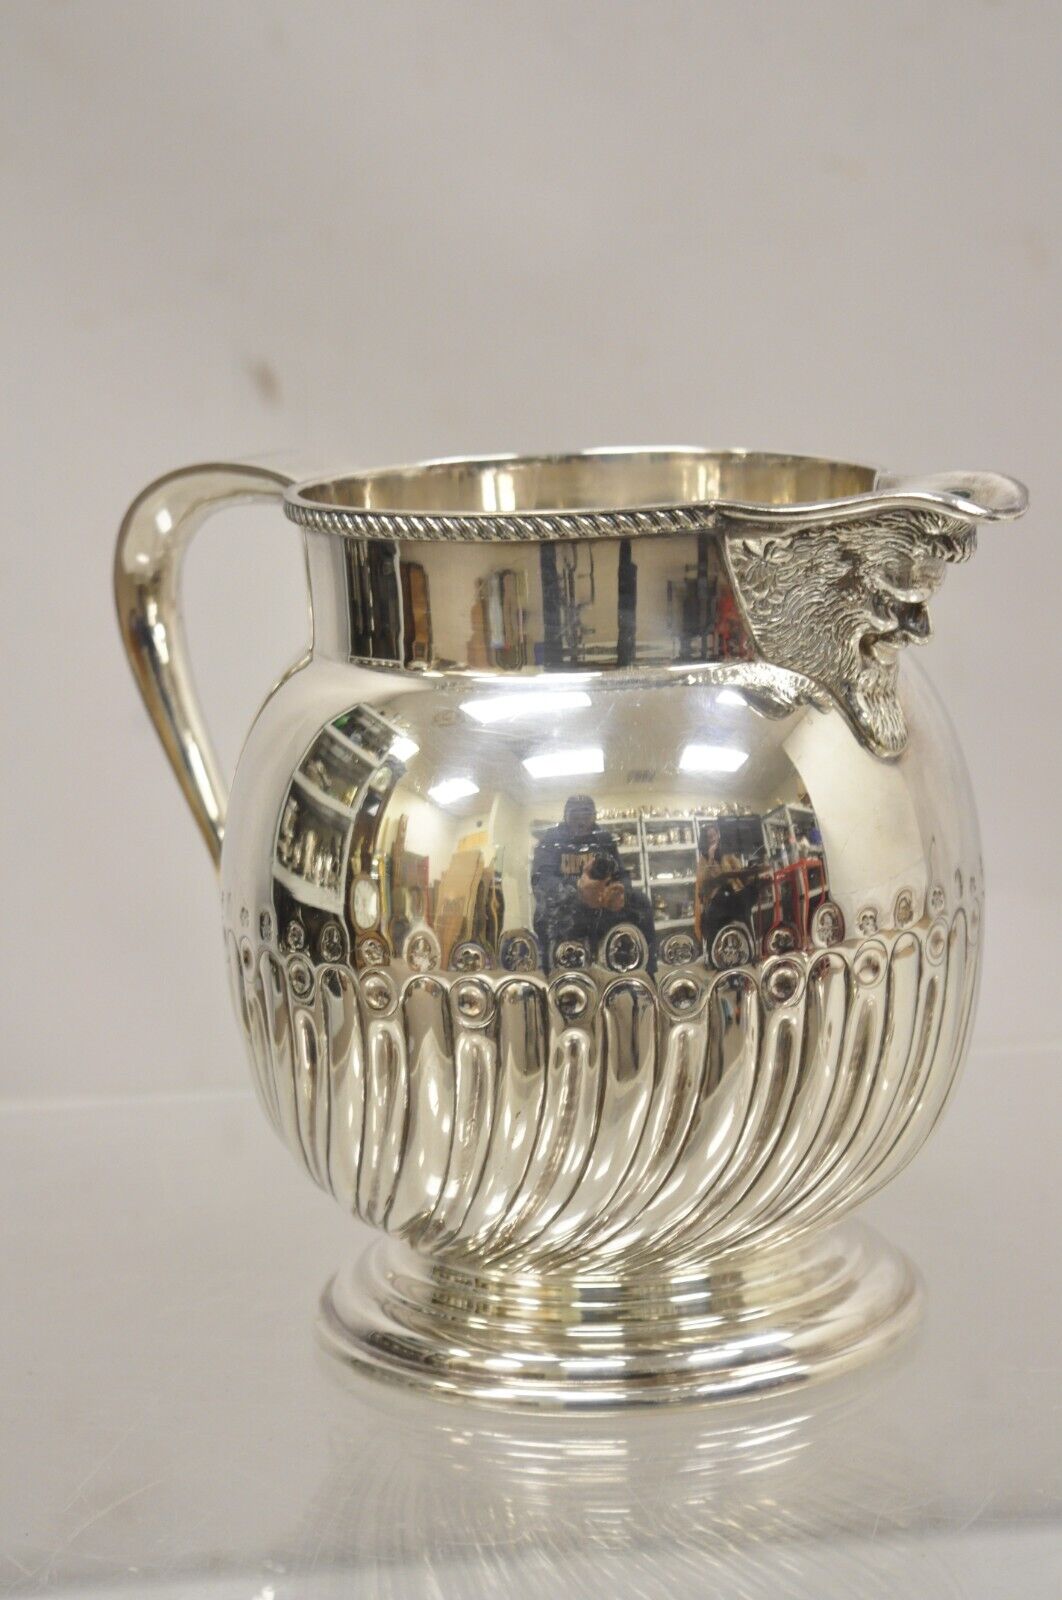 Cheltenham & Co England Silver Plated Hand Chased Bacchus Wine Water Pitcher